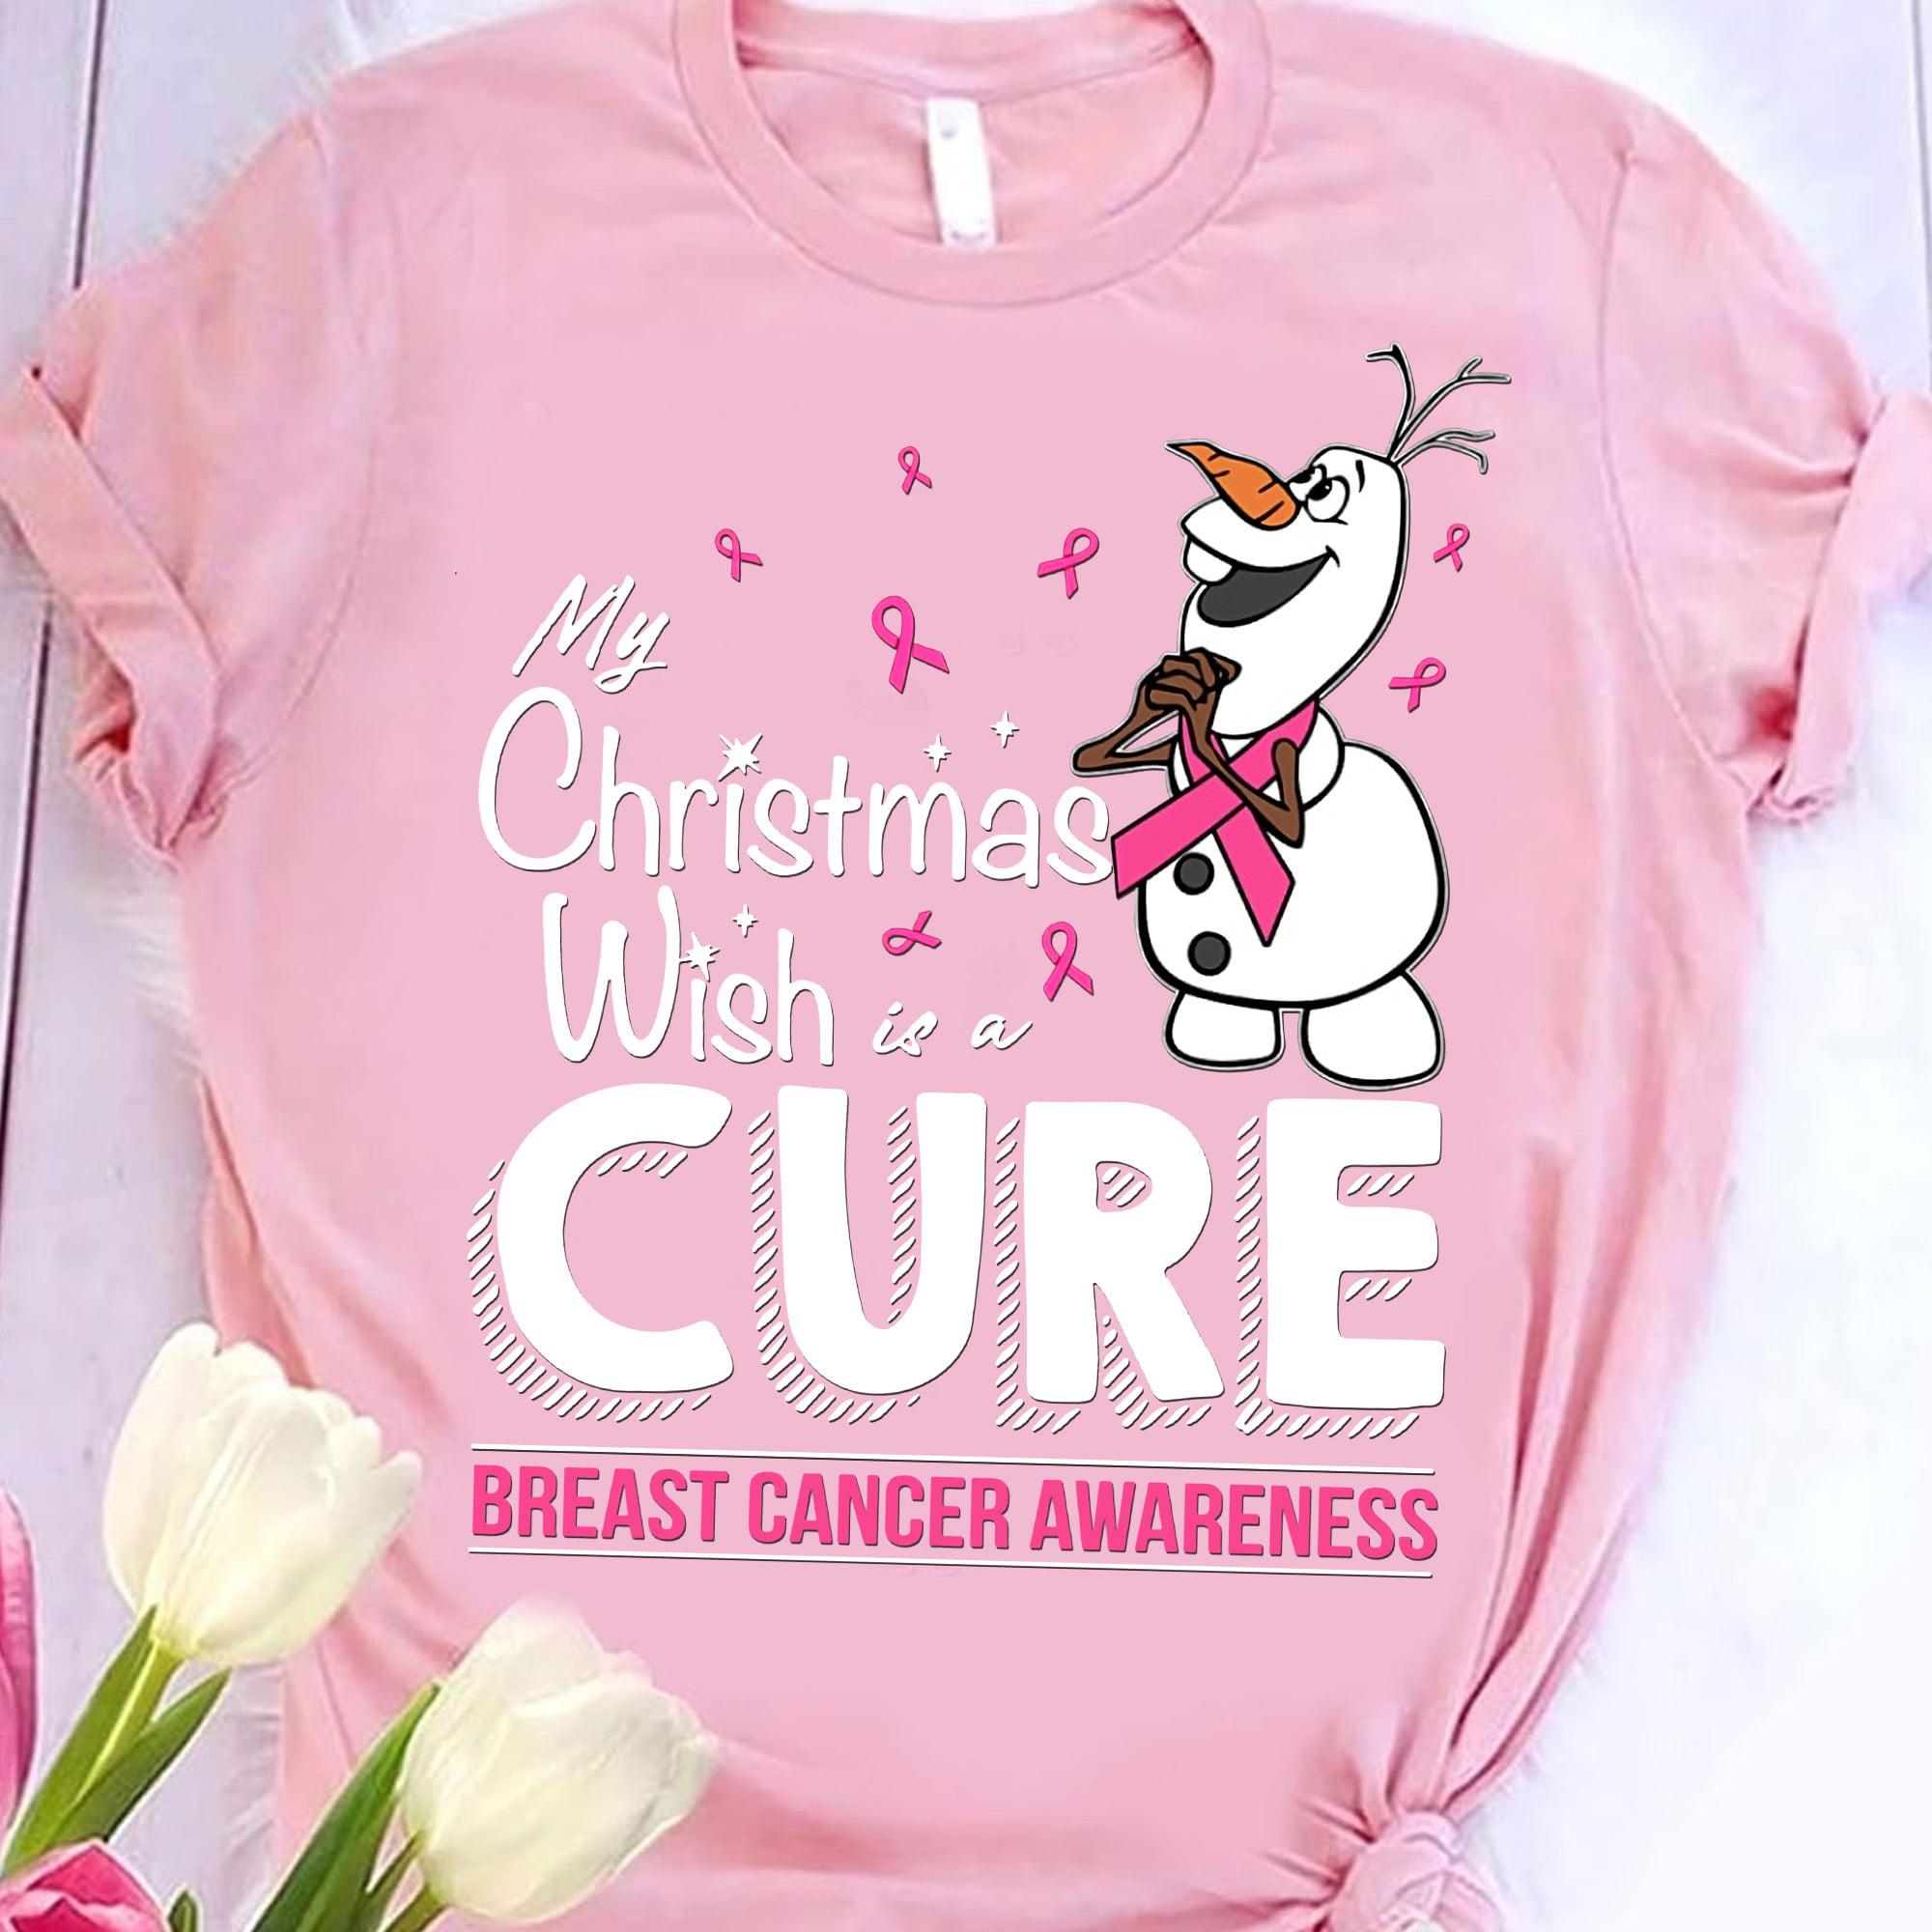 My Christmas wish is a cure - Breast cancer awareness, cure for breast cancer, Christmas snowman